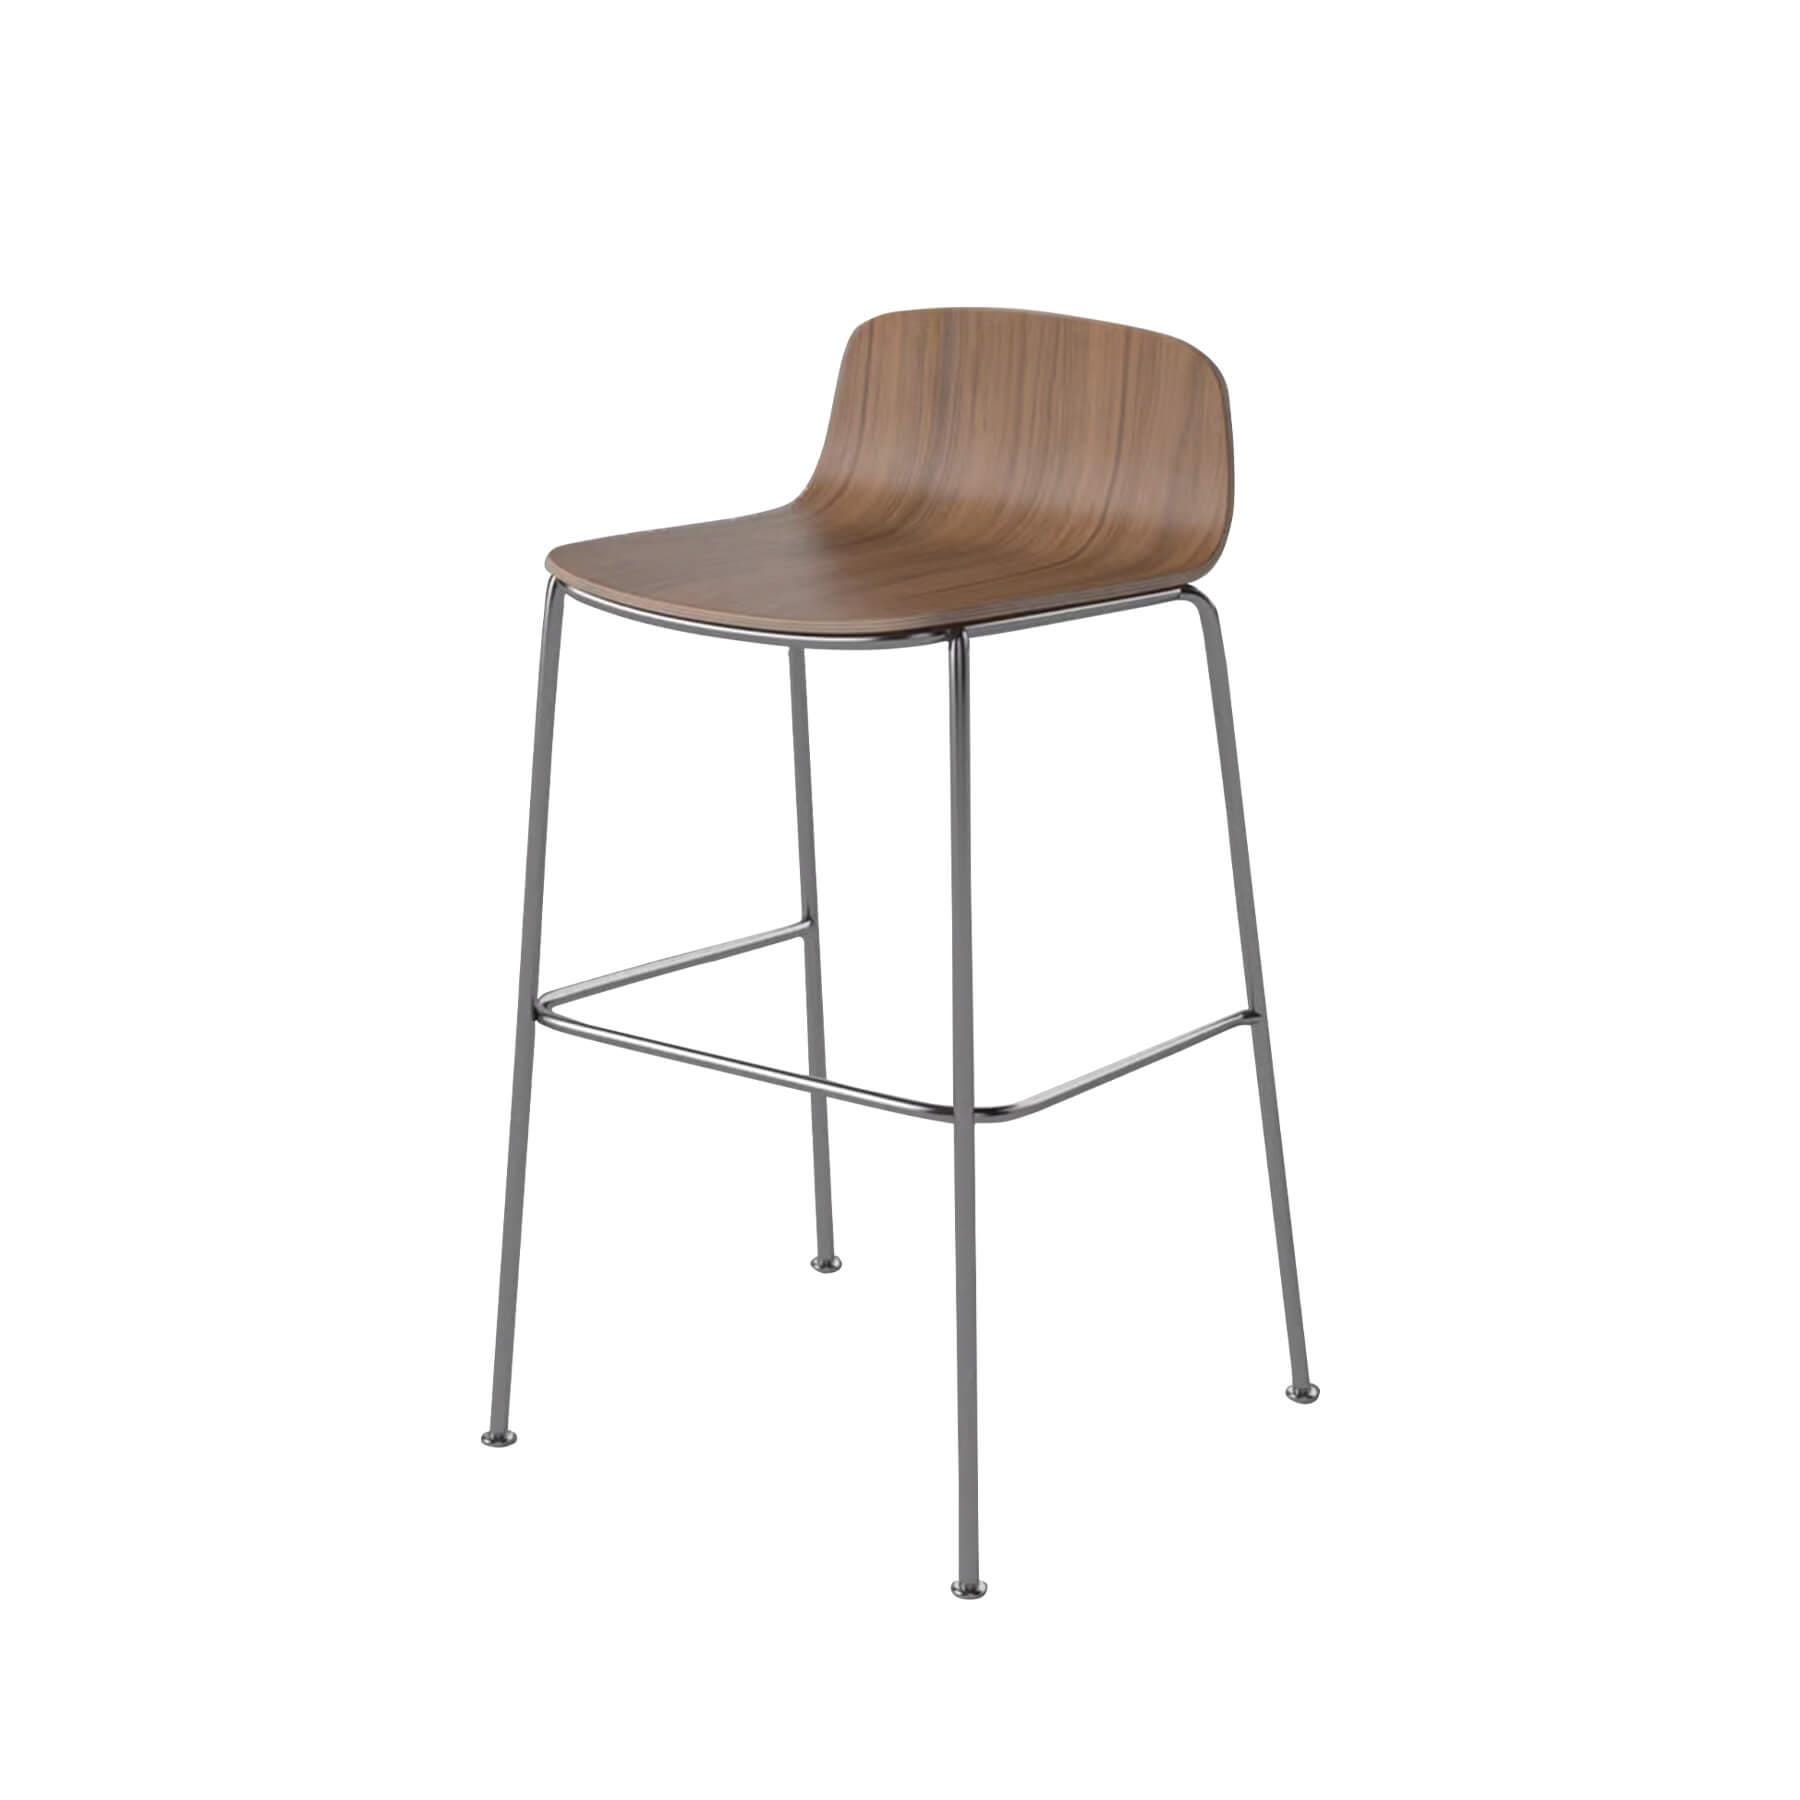 Bolia Palm Stool Kitchen Counter Stool Oiled Walnut Chrome Plated Legs Dark Wood Designer Furniture From Holloways Of Ludlow